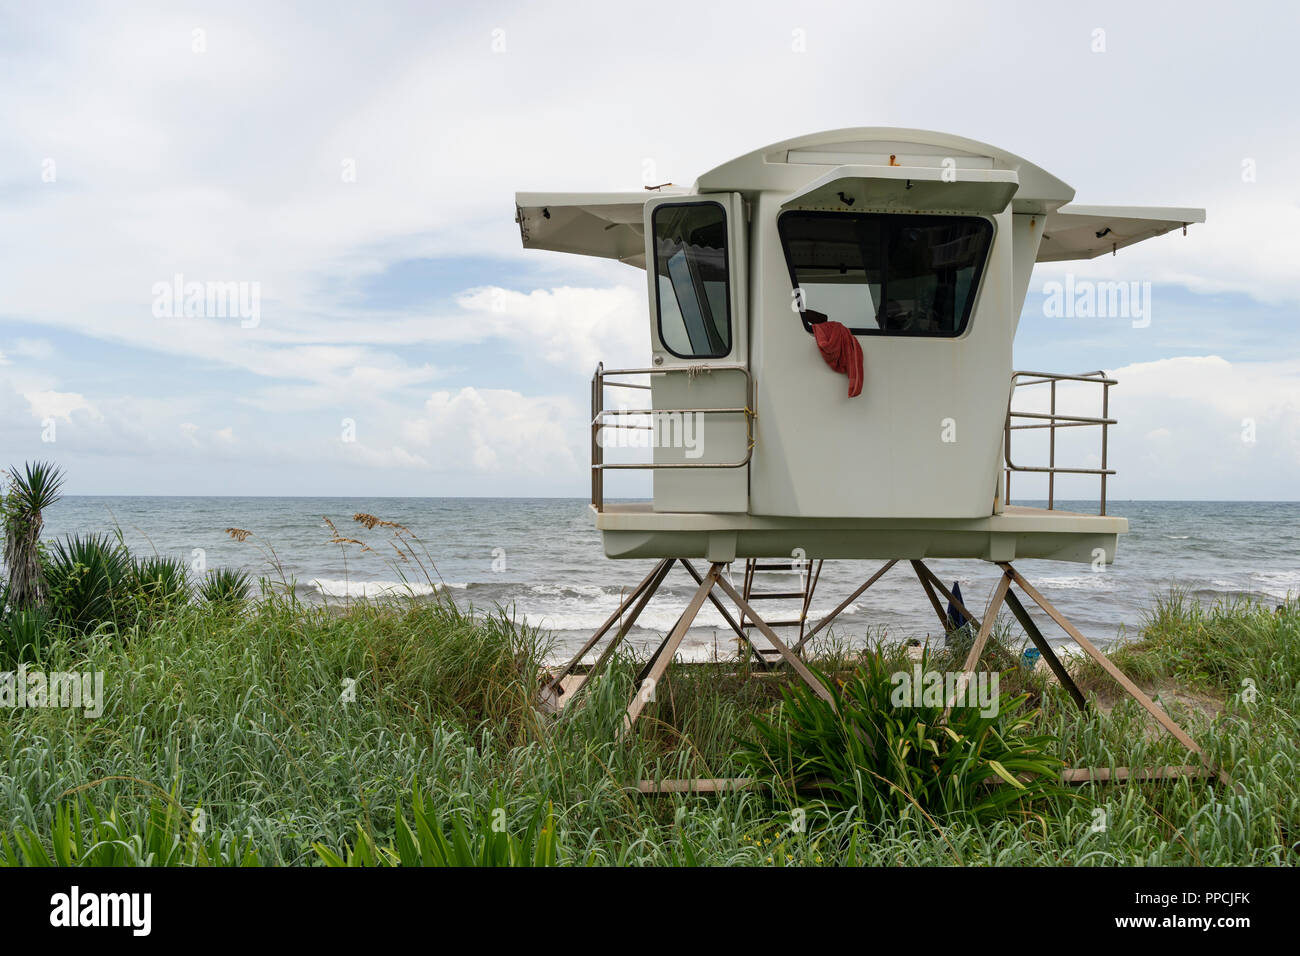 A towel hangs over the window of an elevated coast life guard hut shack Palm Beach Florida Stock Photo